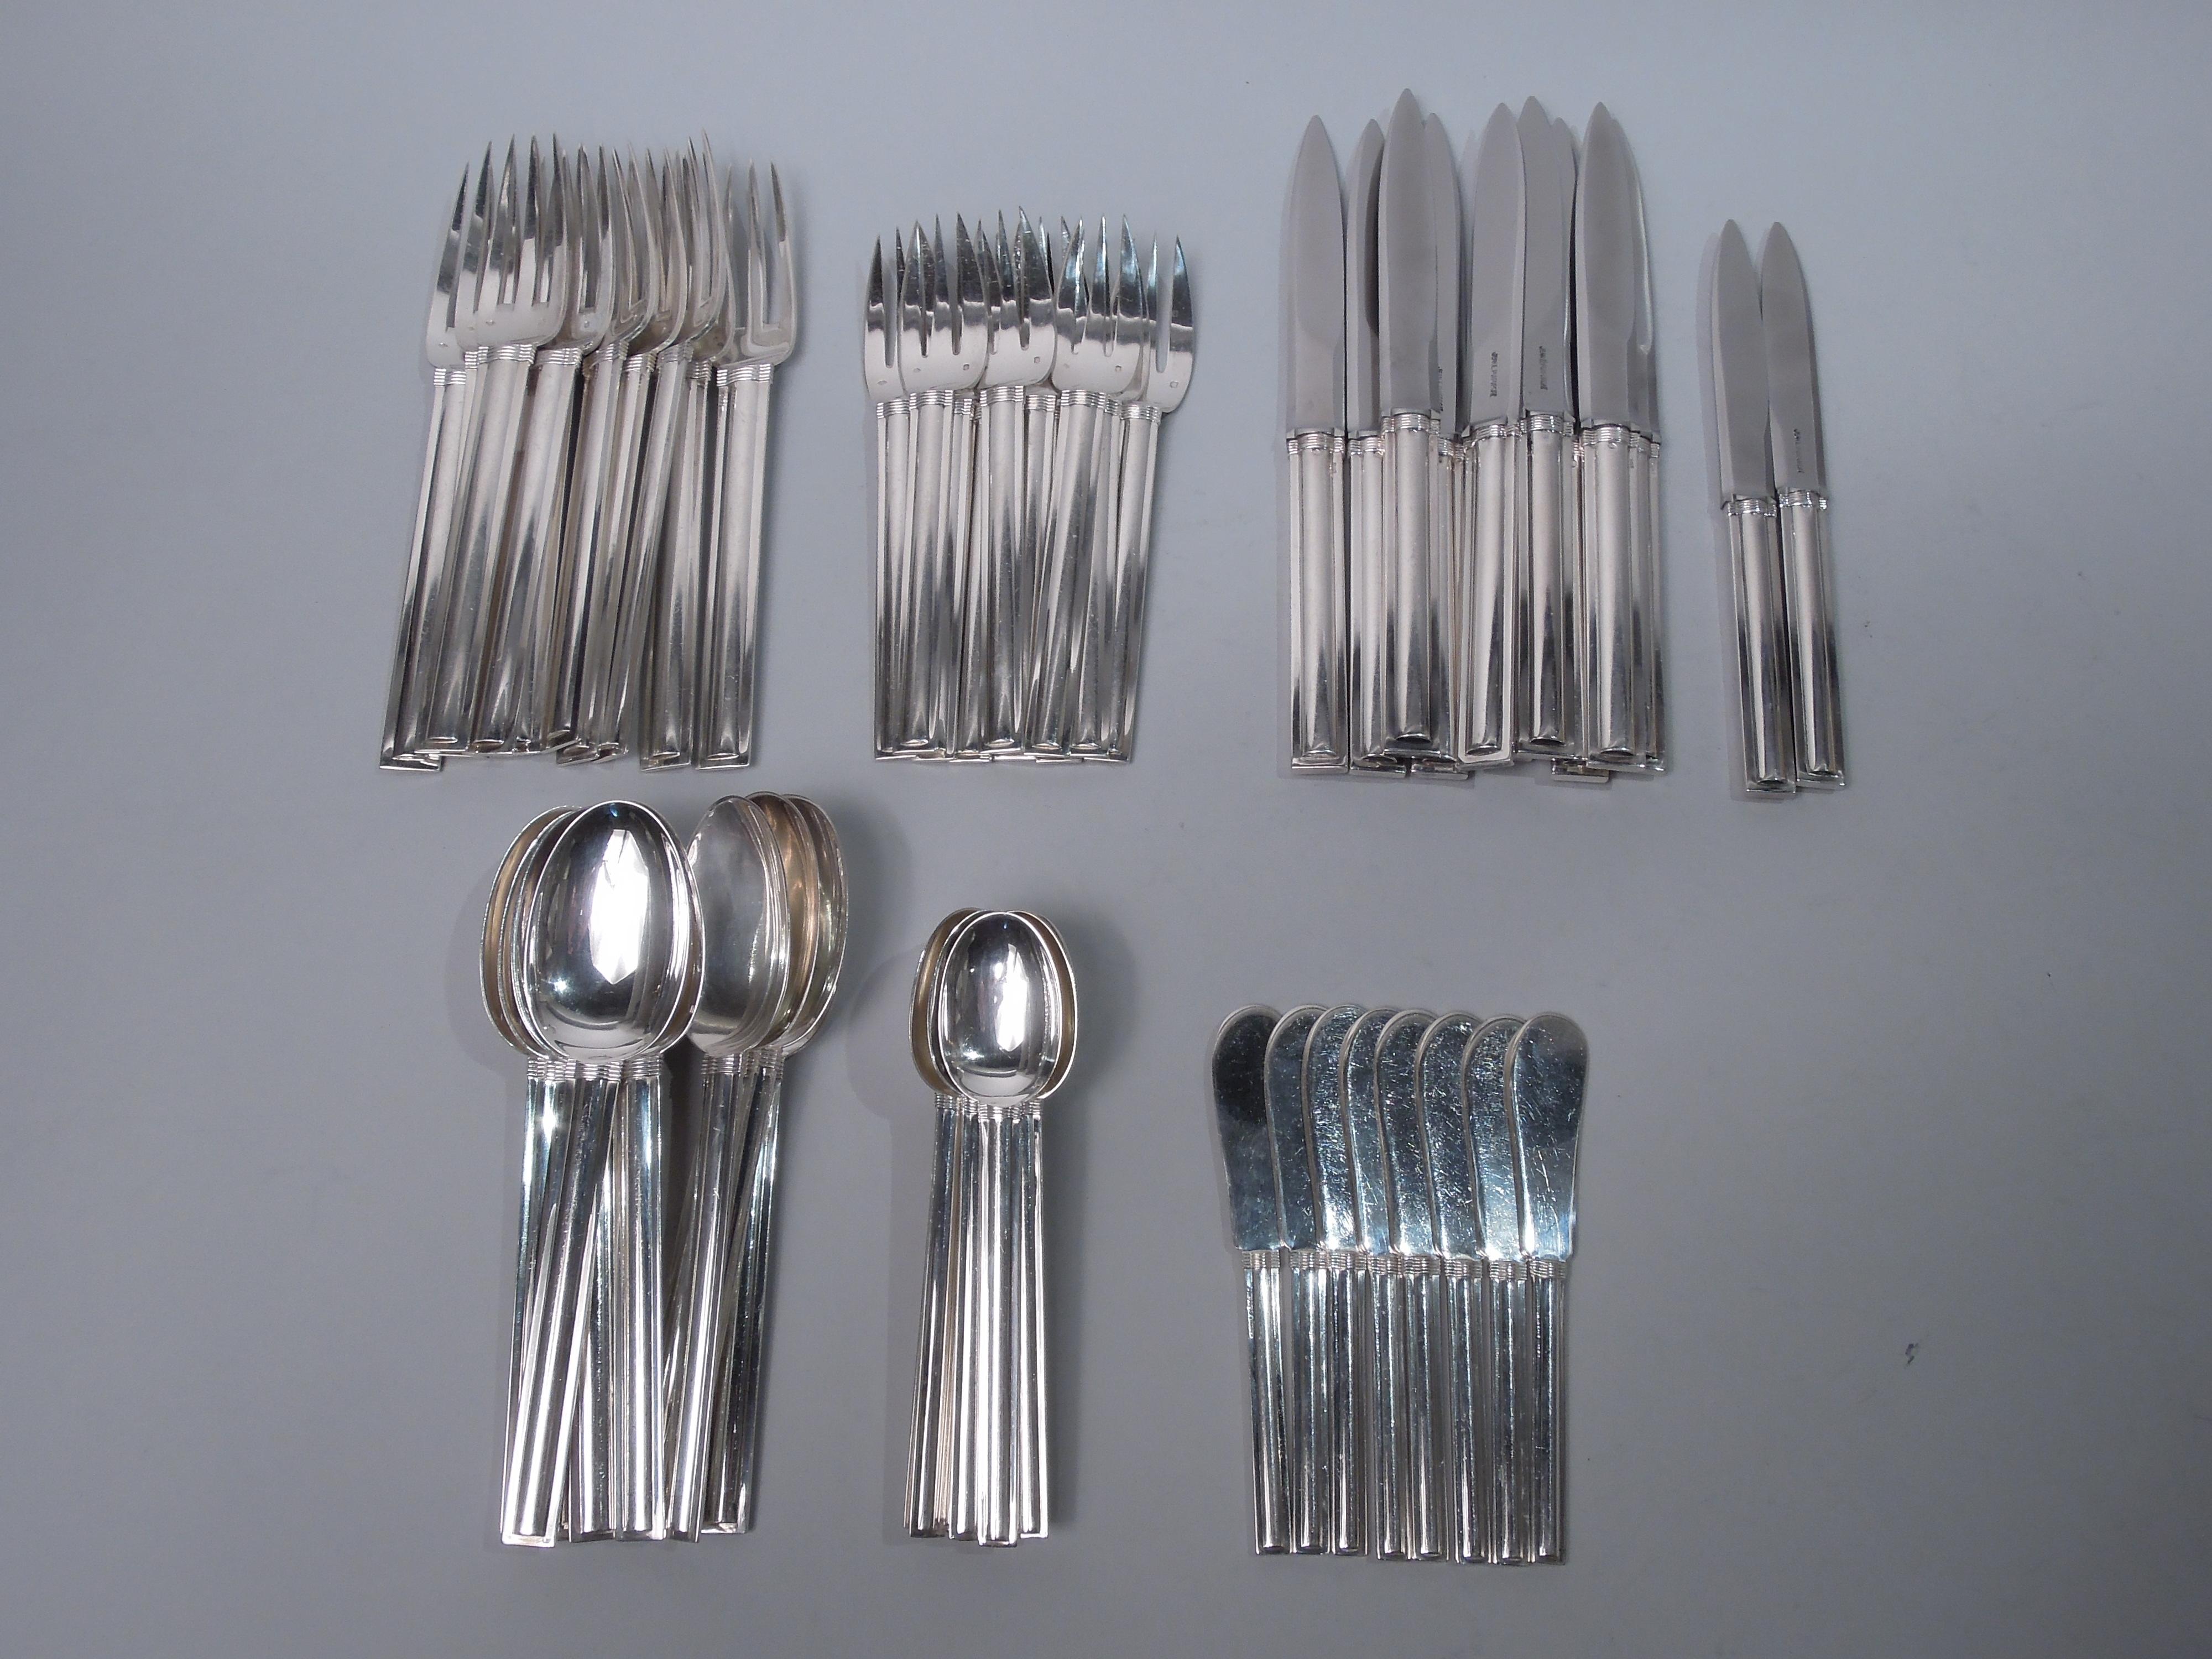 Cannes 950 silver dinner set for ten. Made by Puiforcat in France. This set comprises 60 pieces (dimensions in inches): Forks: 10 dinner forks (8) and 10 salad forks (6 7/8); Spoons: 10 teaspoons (5 7/8) and 10 dessert spoons (7); Knives: 10 dinner